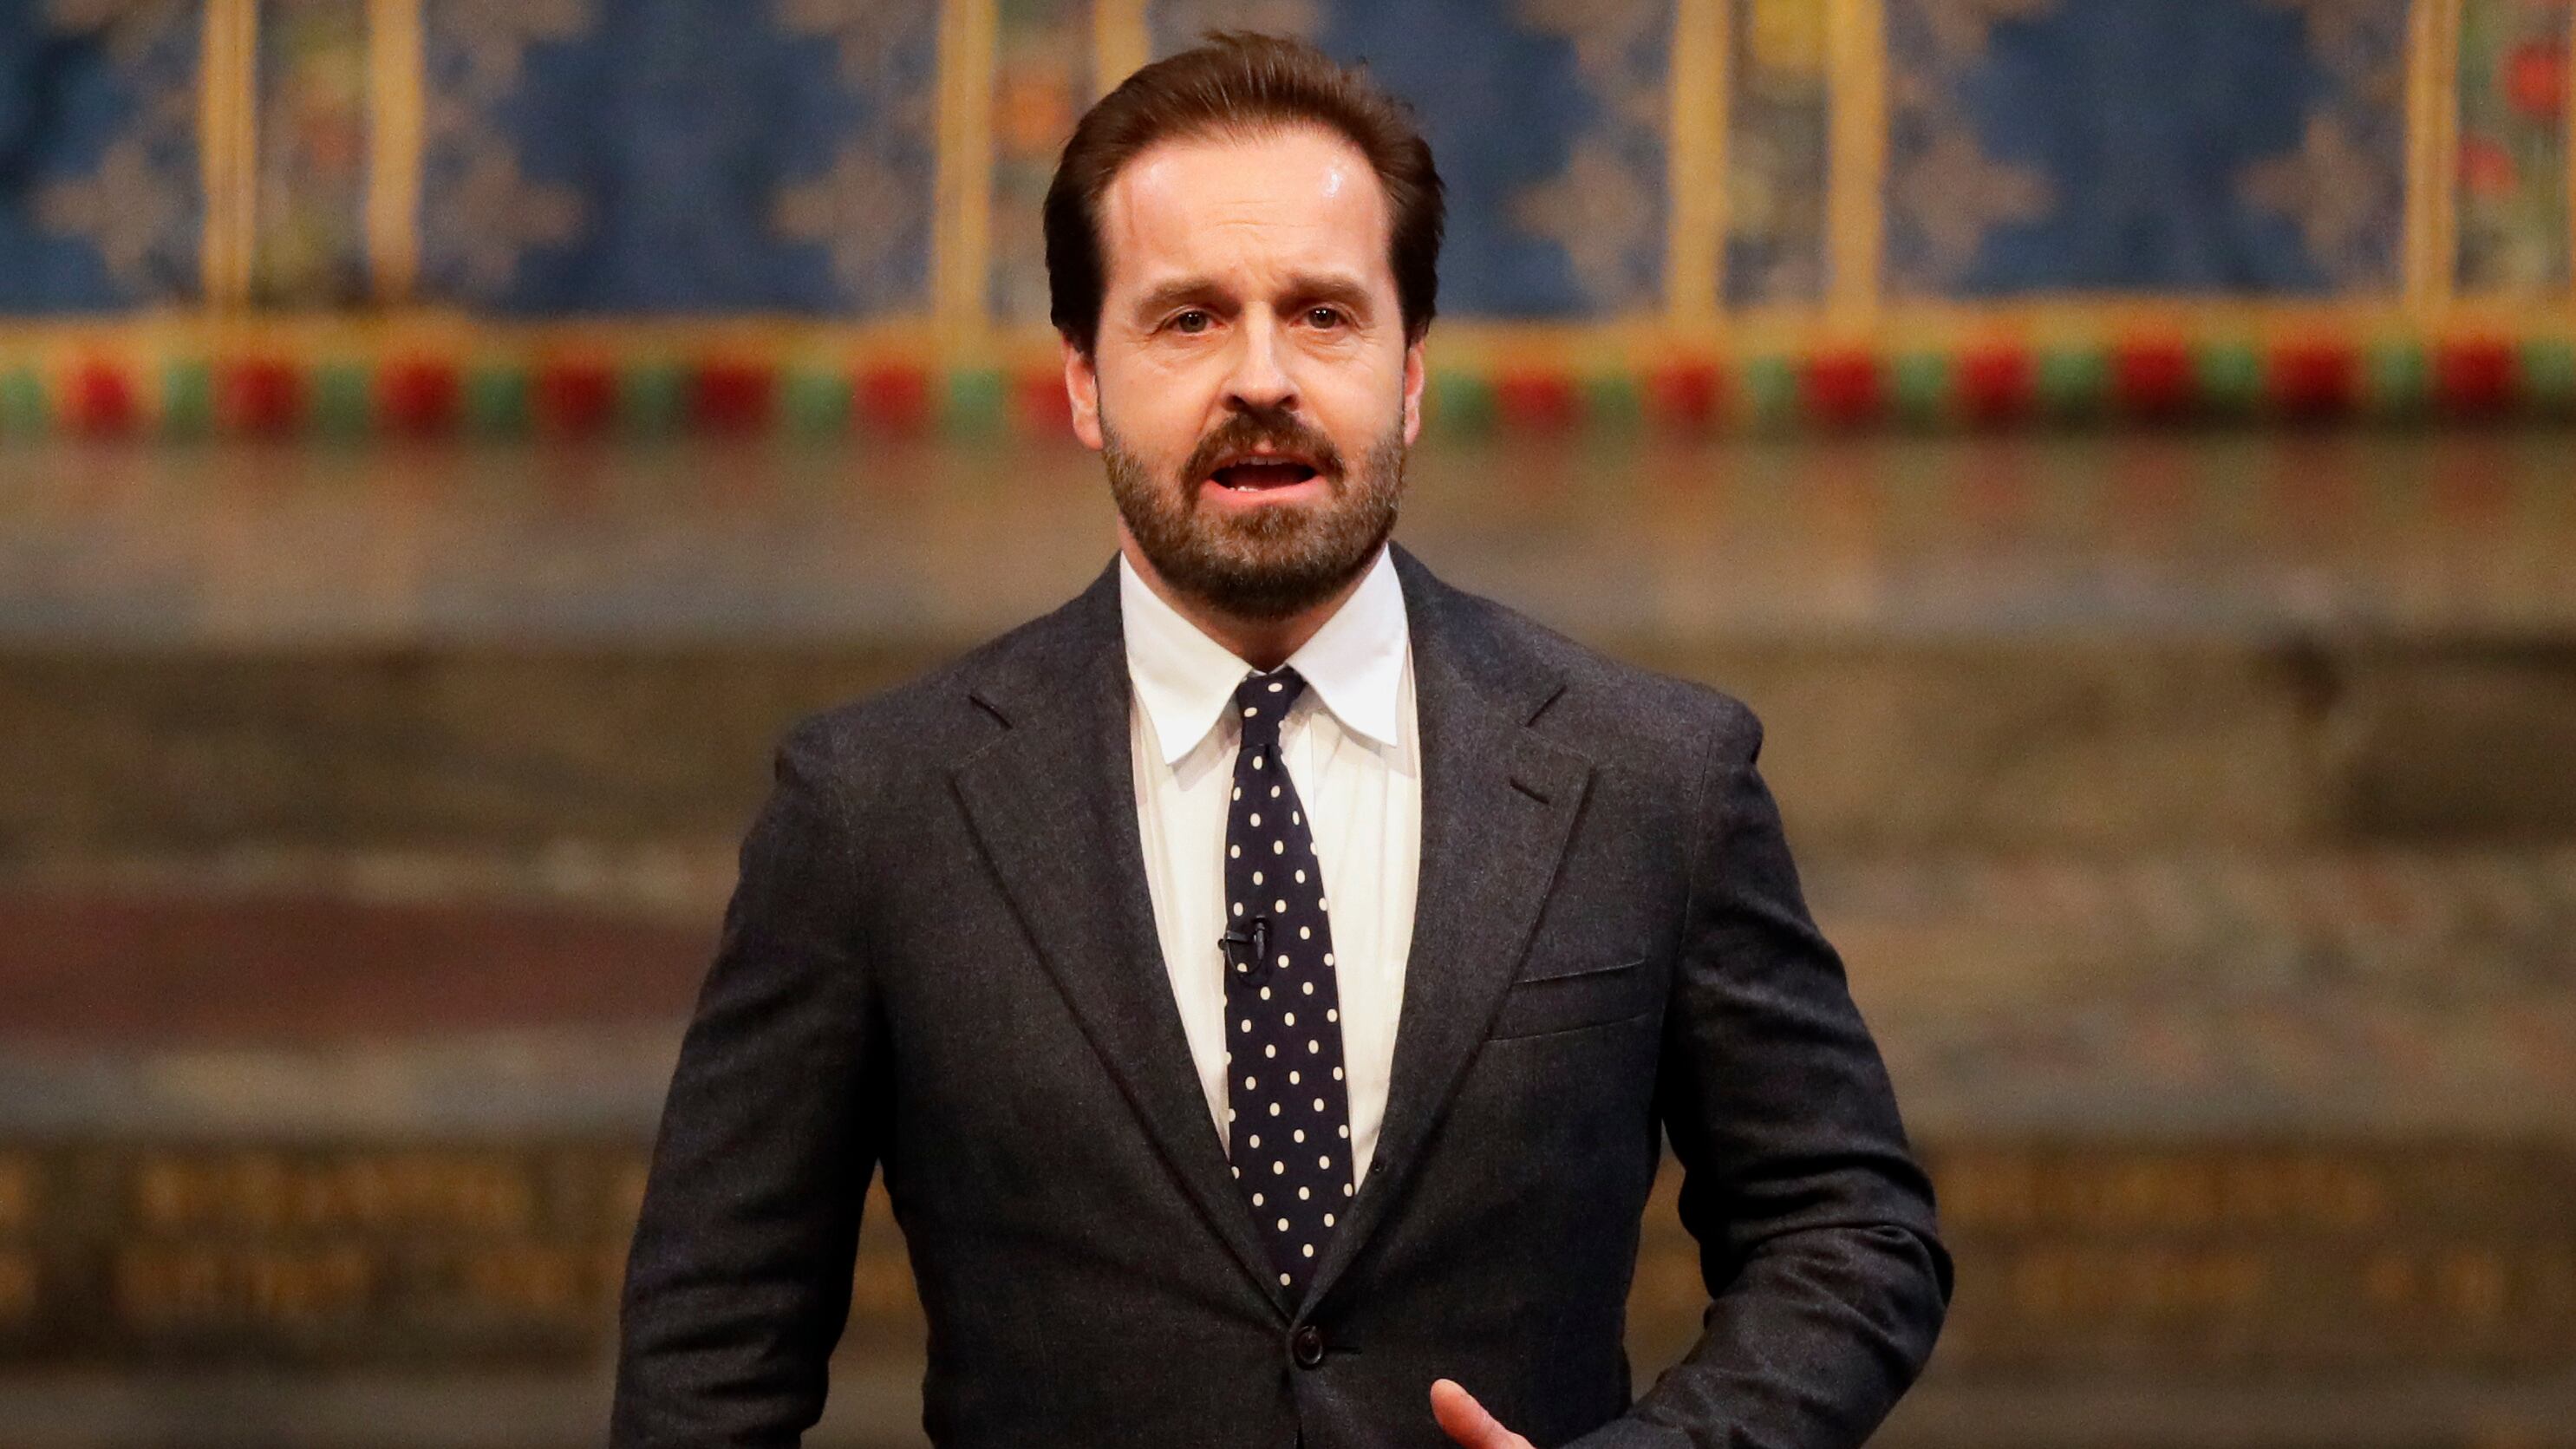 English tenor and actor Alfie Boe has spoken about the lack of treatment progress for brain tumours